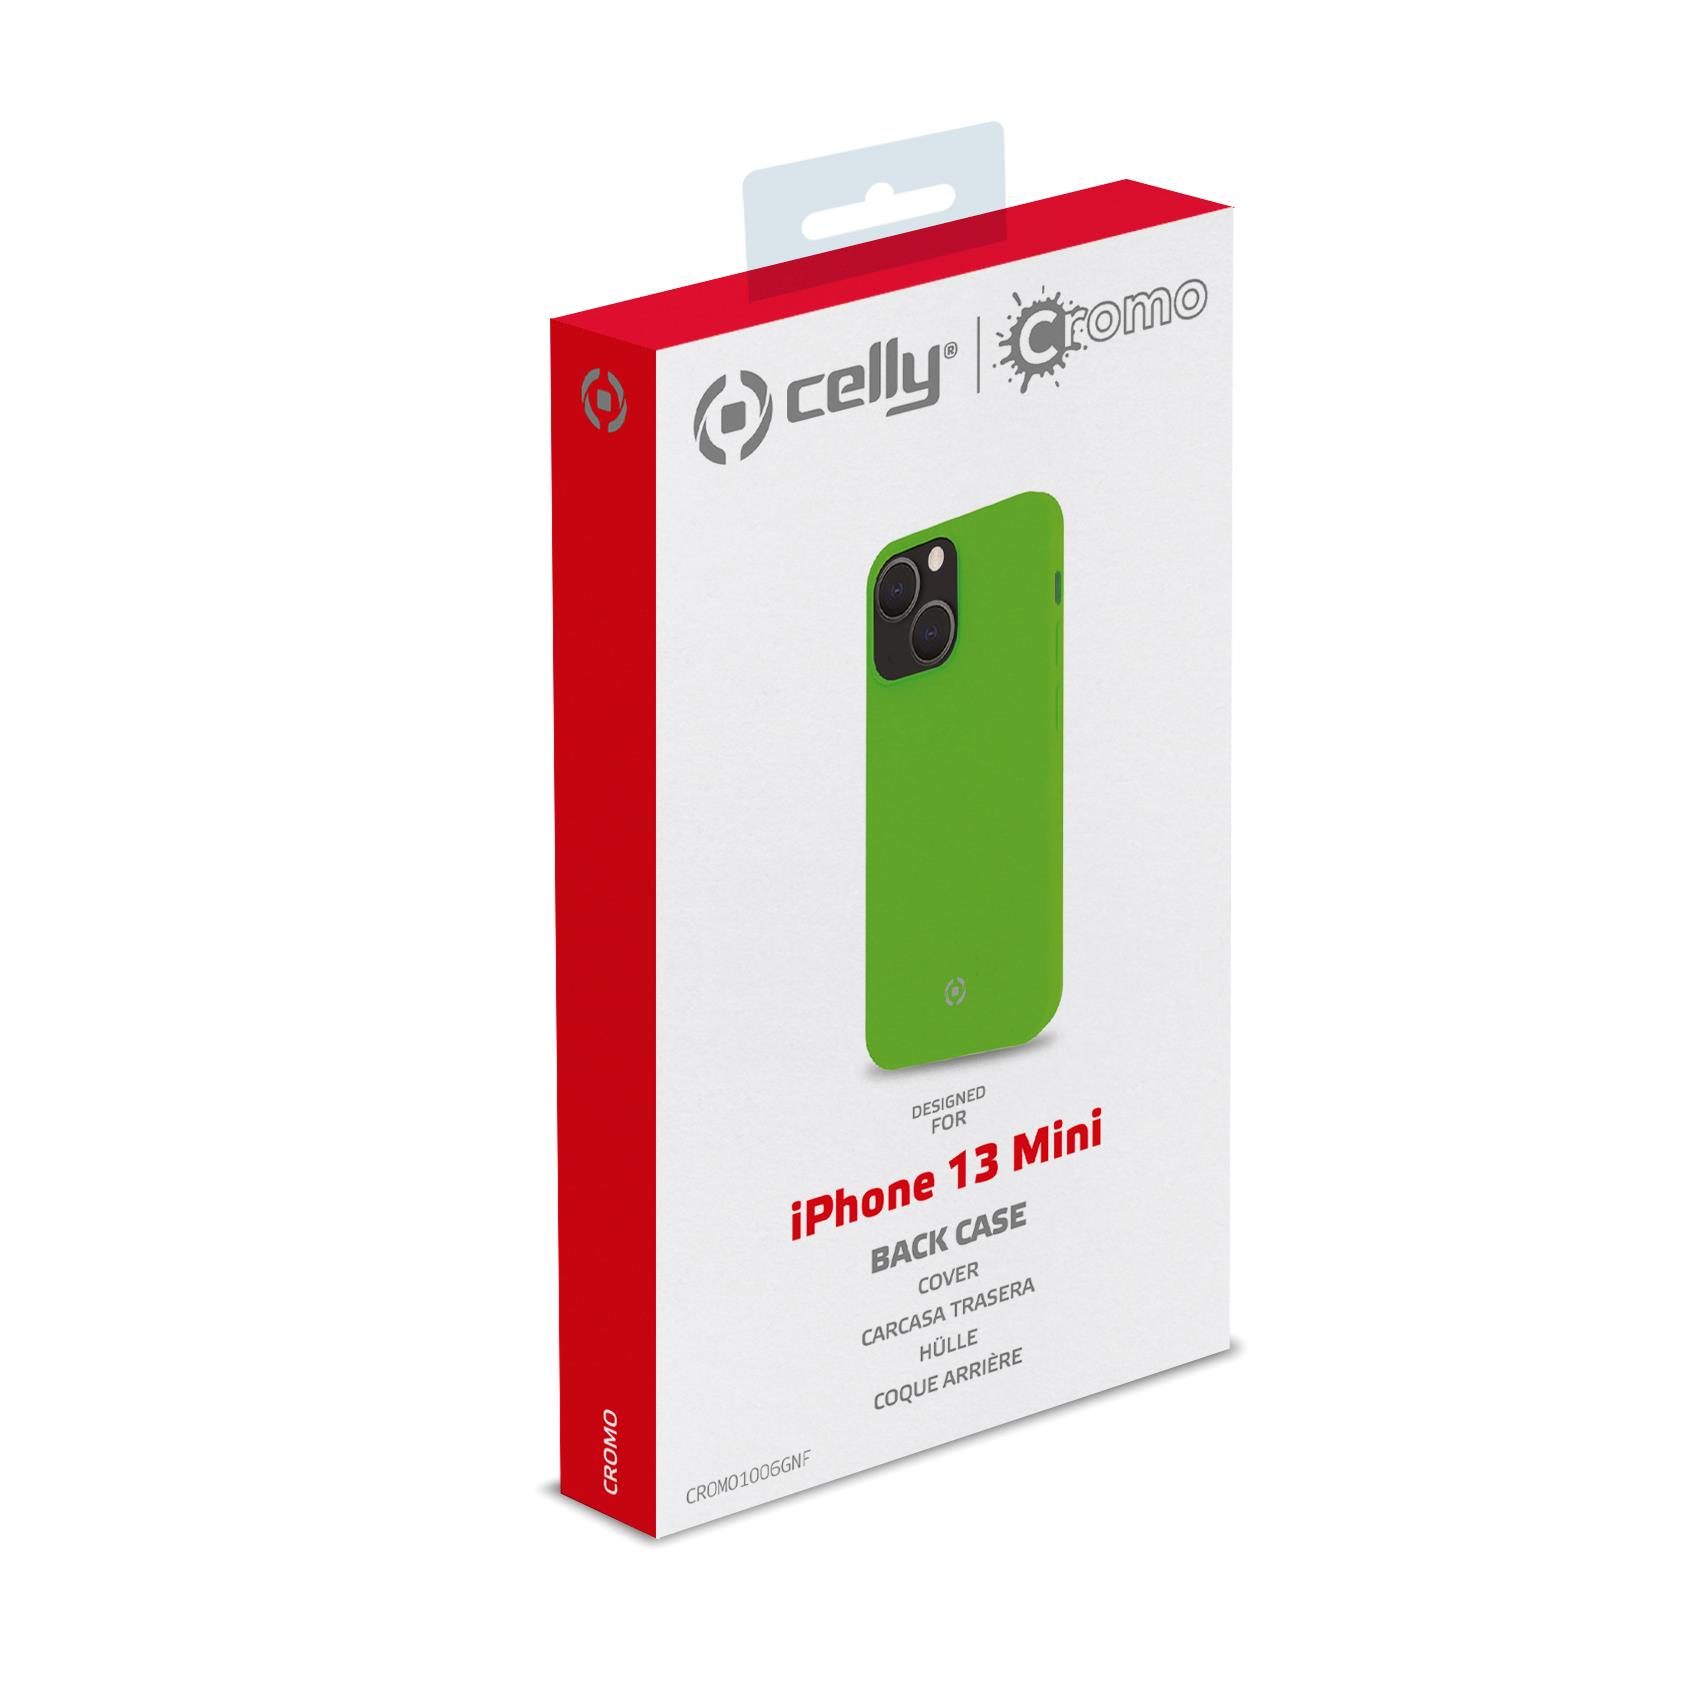 Cromo Fluo Iphone 13 Mini Gn Celly Cromo1006gnf 8021735190516